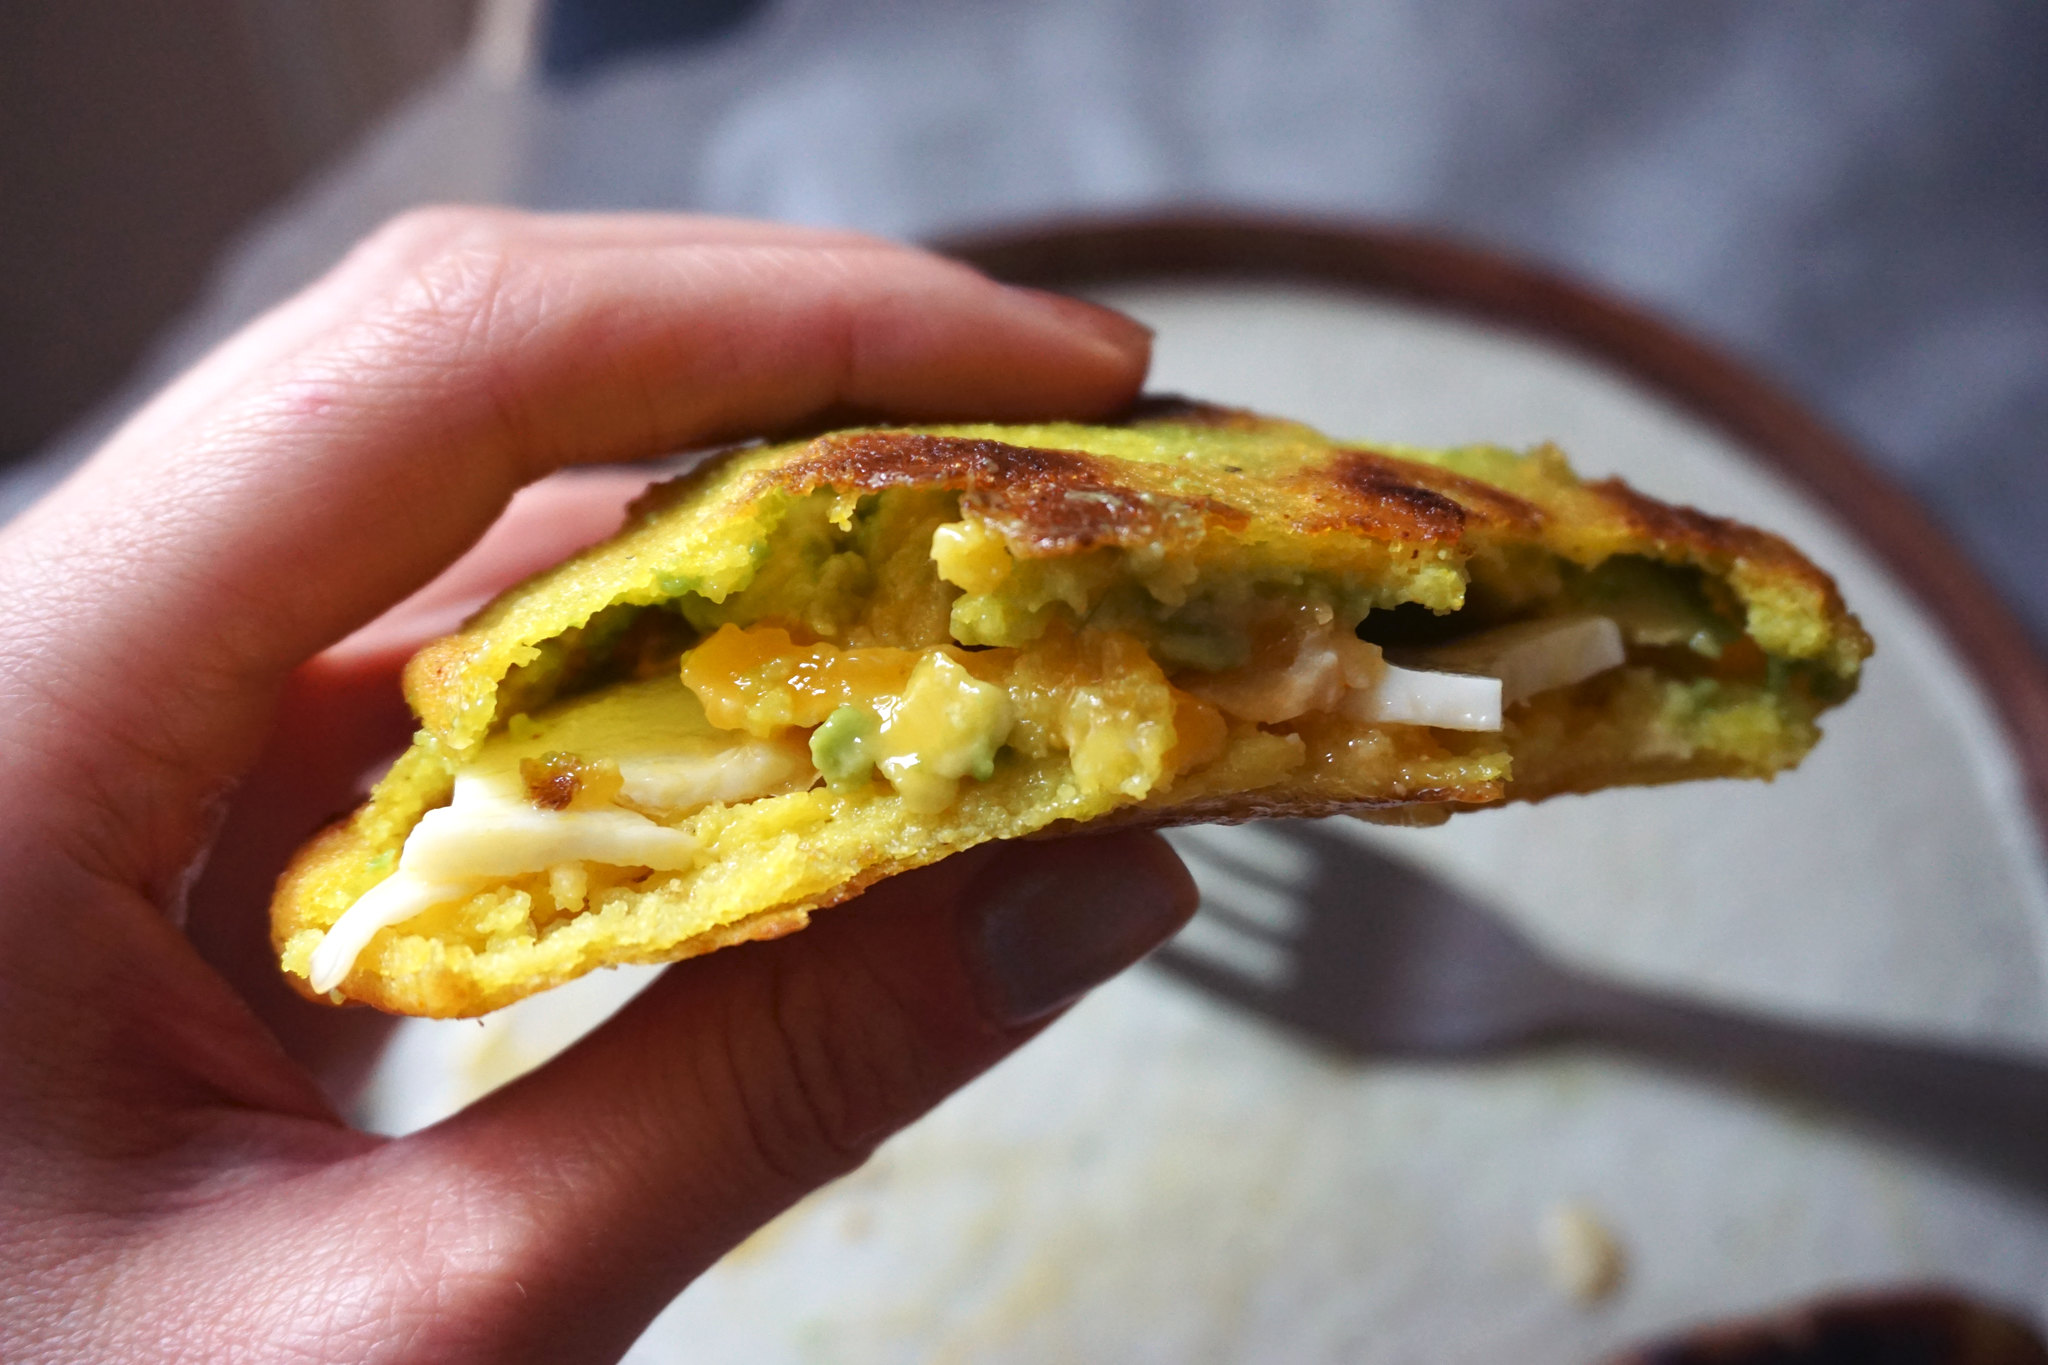 Gluten free arepas with egg, sausage and avocado